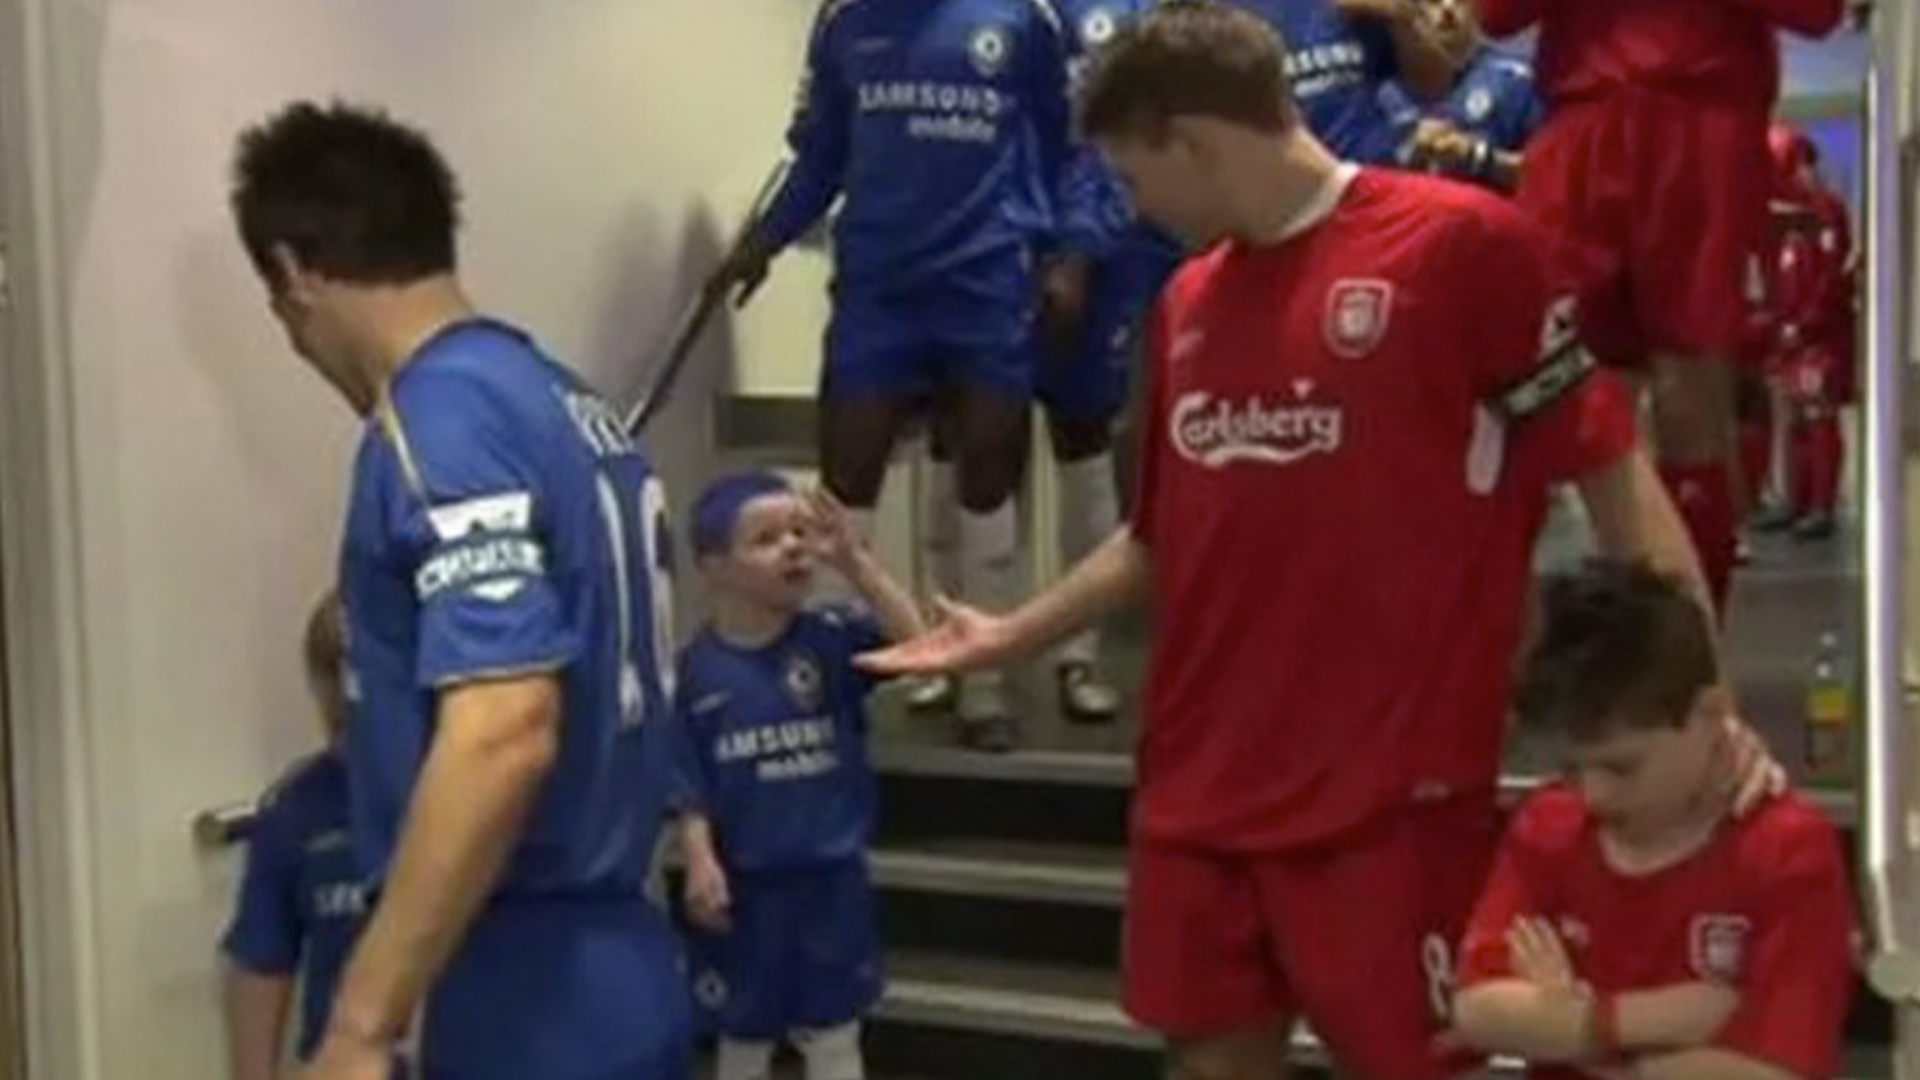 I famously humiliated Steven Gerrard as a Chelsea mascot before going on to play non-league under ex-Premier League star